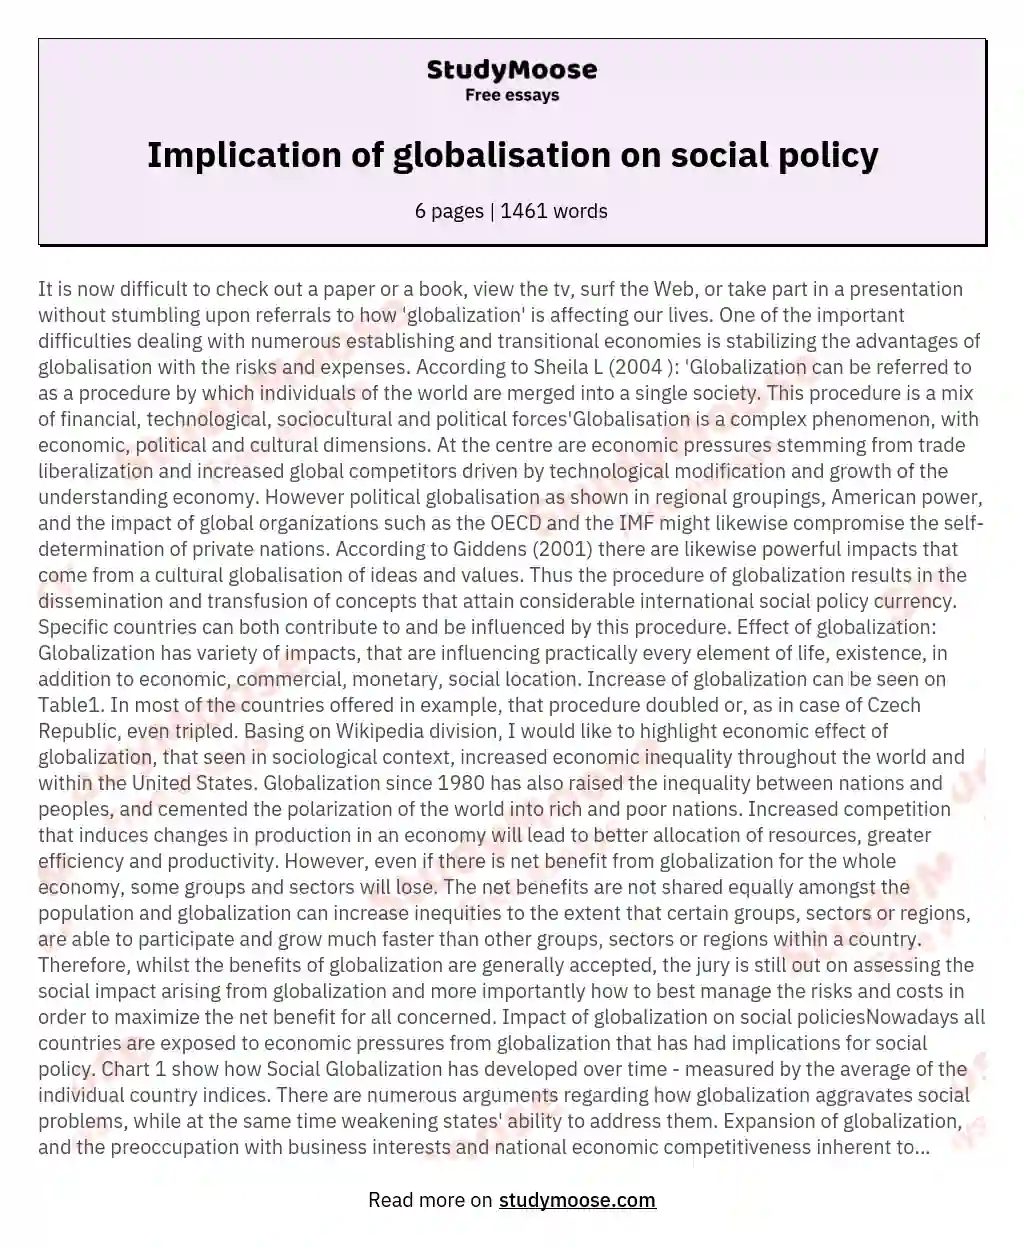 Implication of globalisation on social policy essay